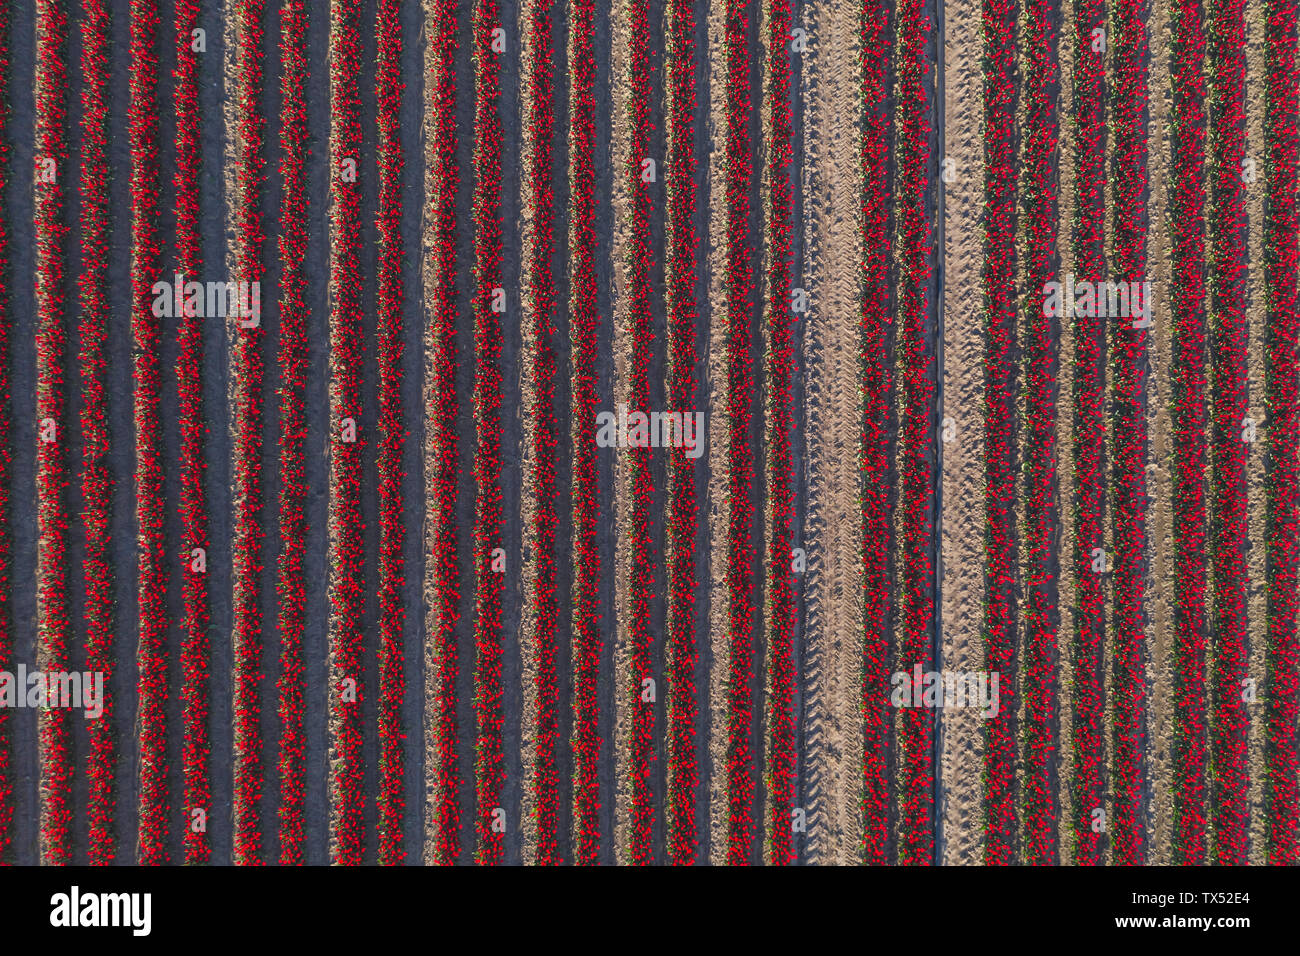 Germany, Saxony-Anhalt, aerial view of red tulip field Stock Photo